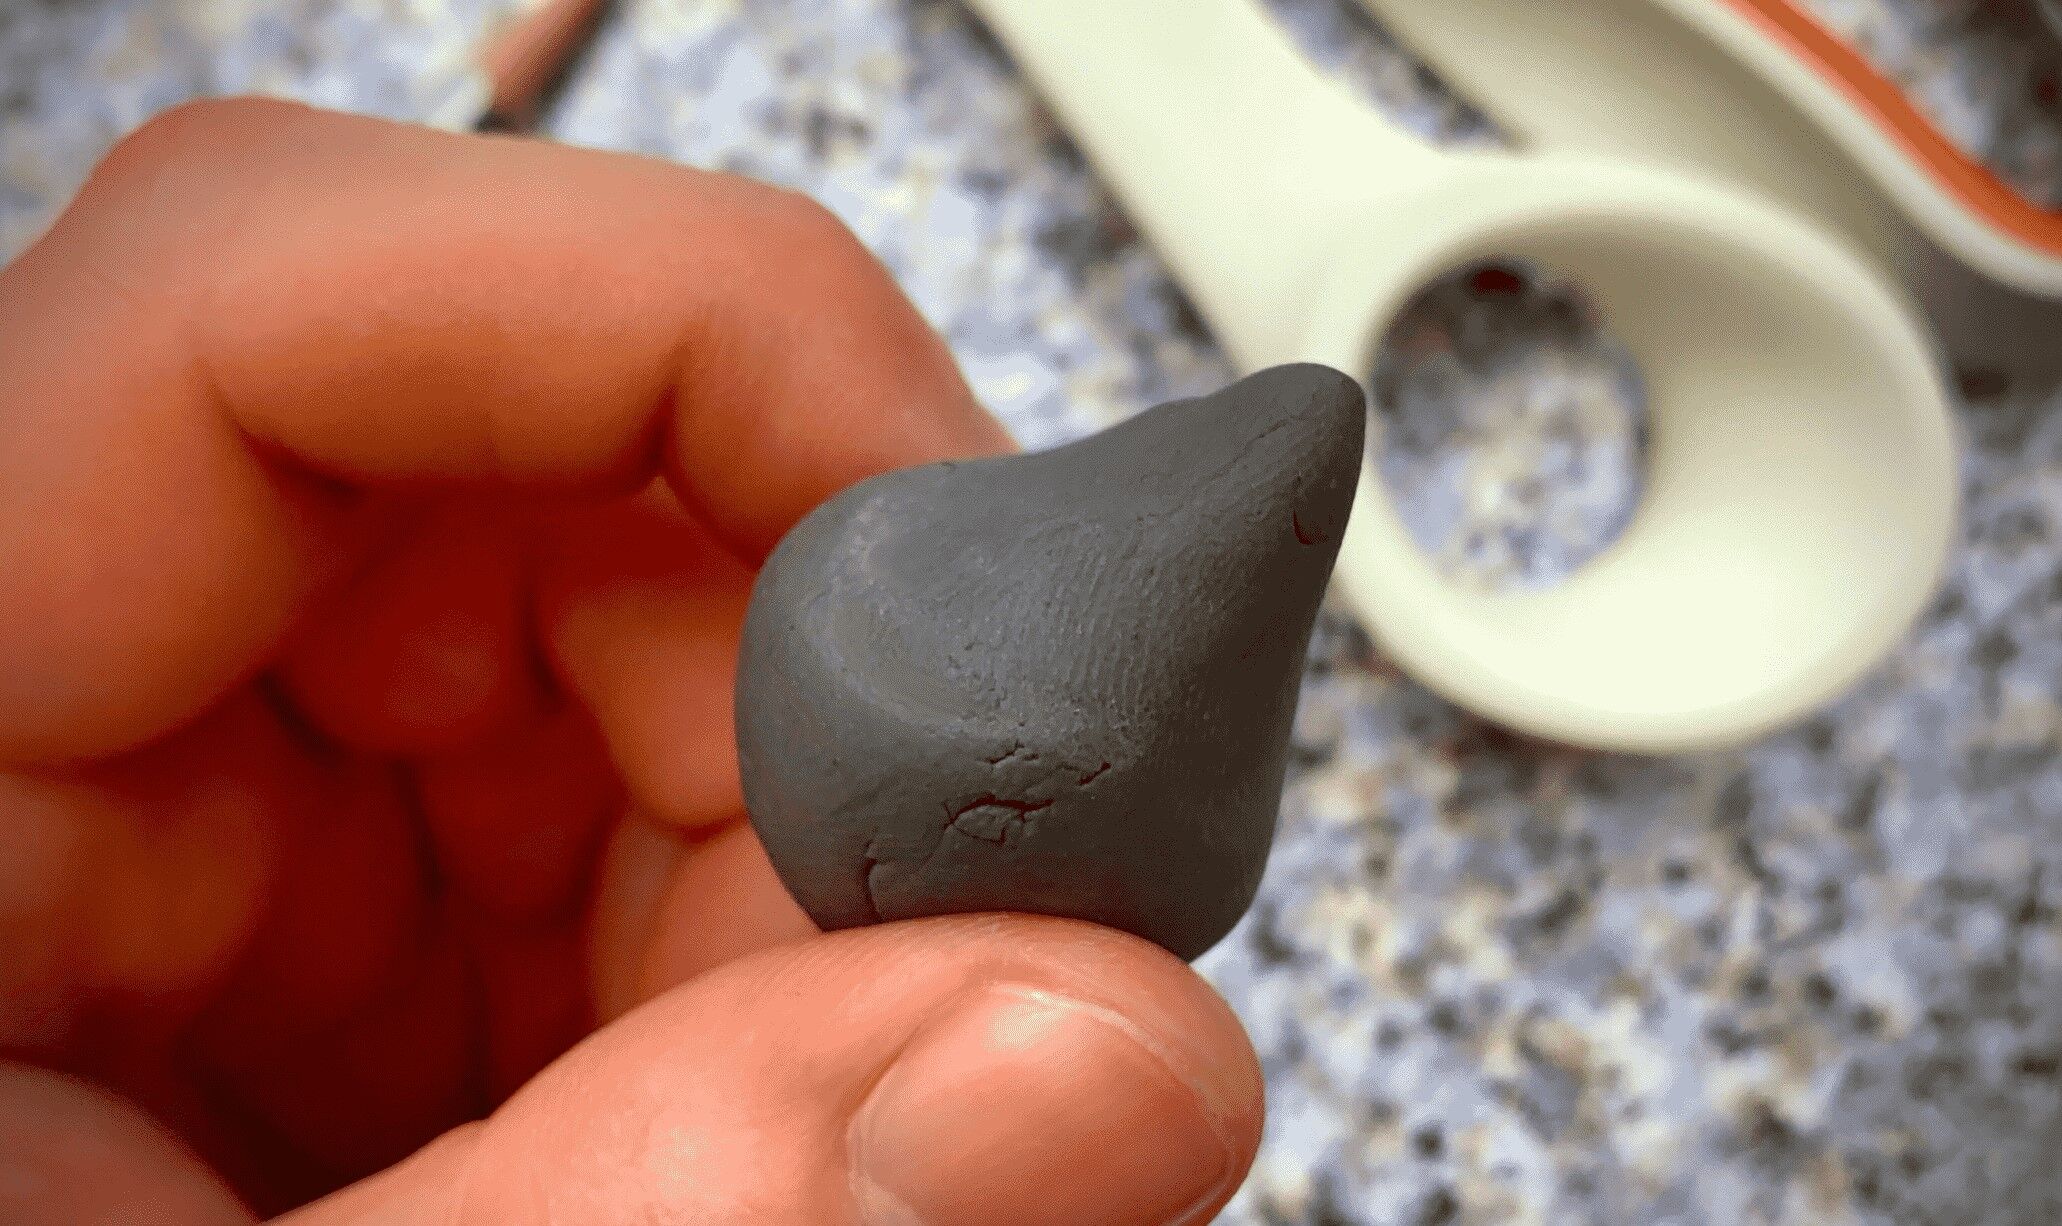 How To Make Kneaded Eraser At Home